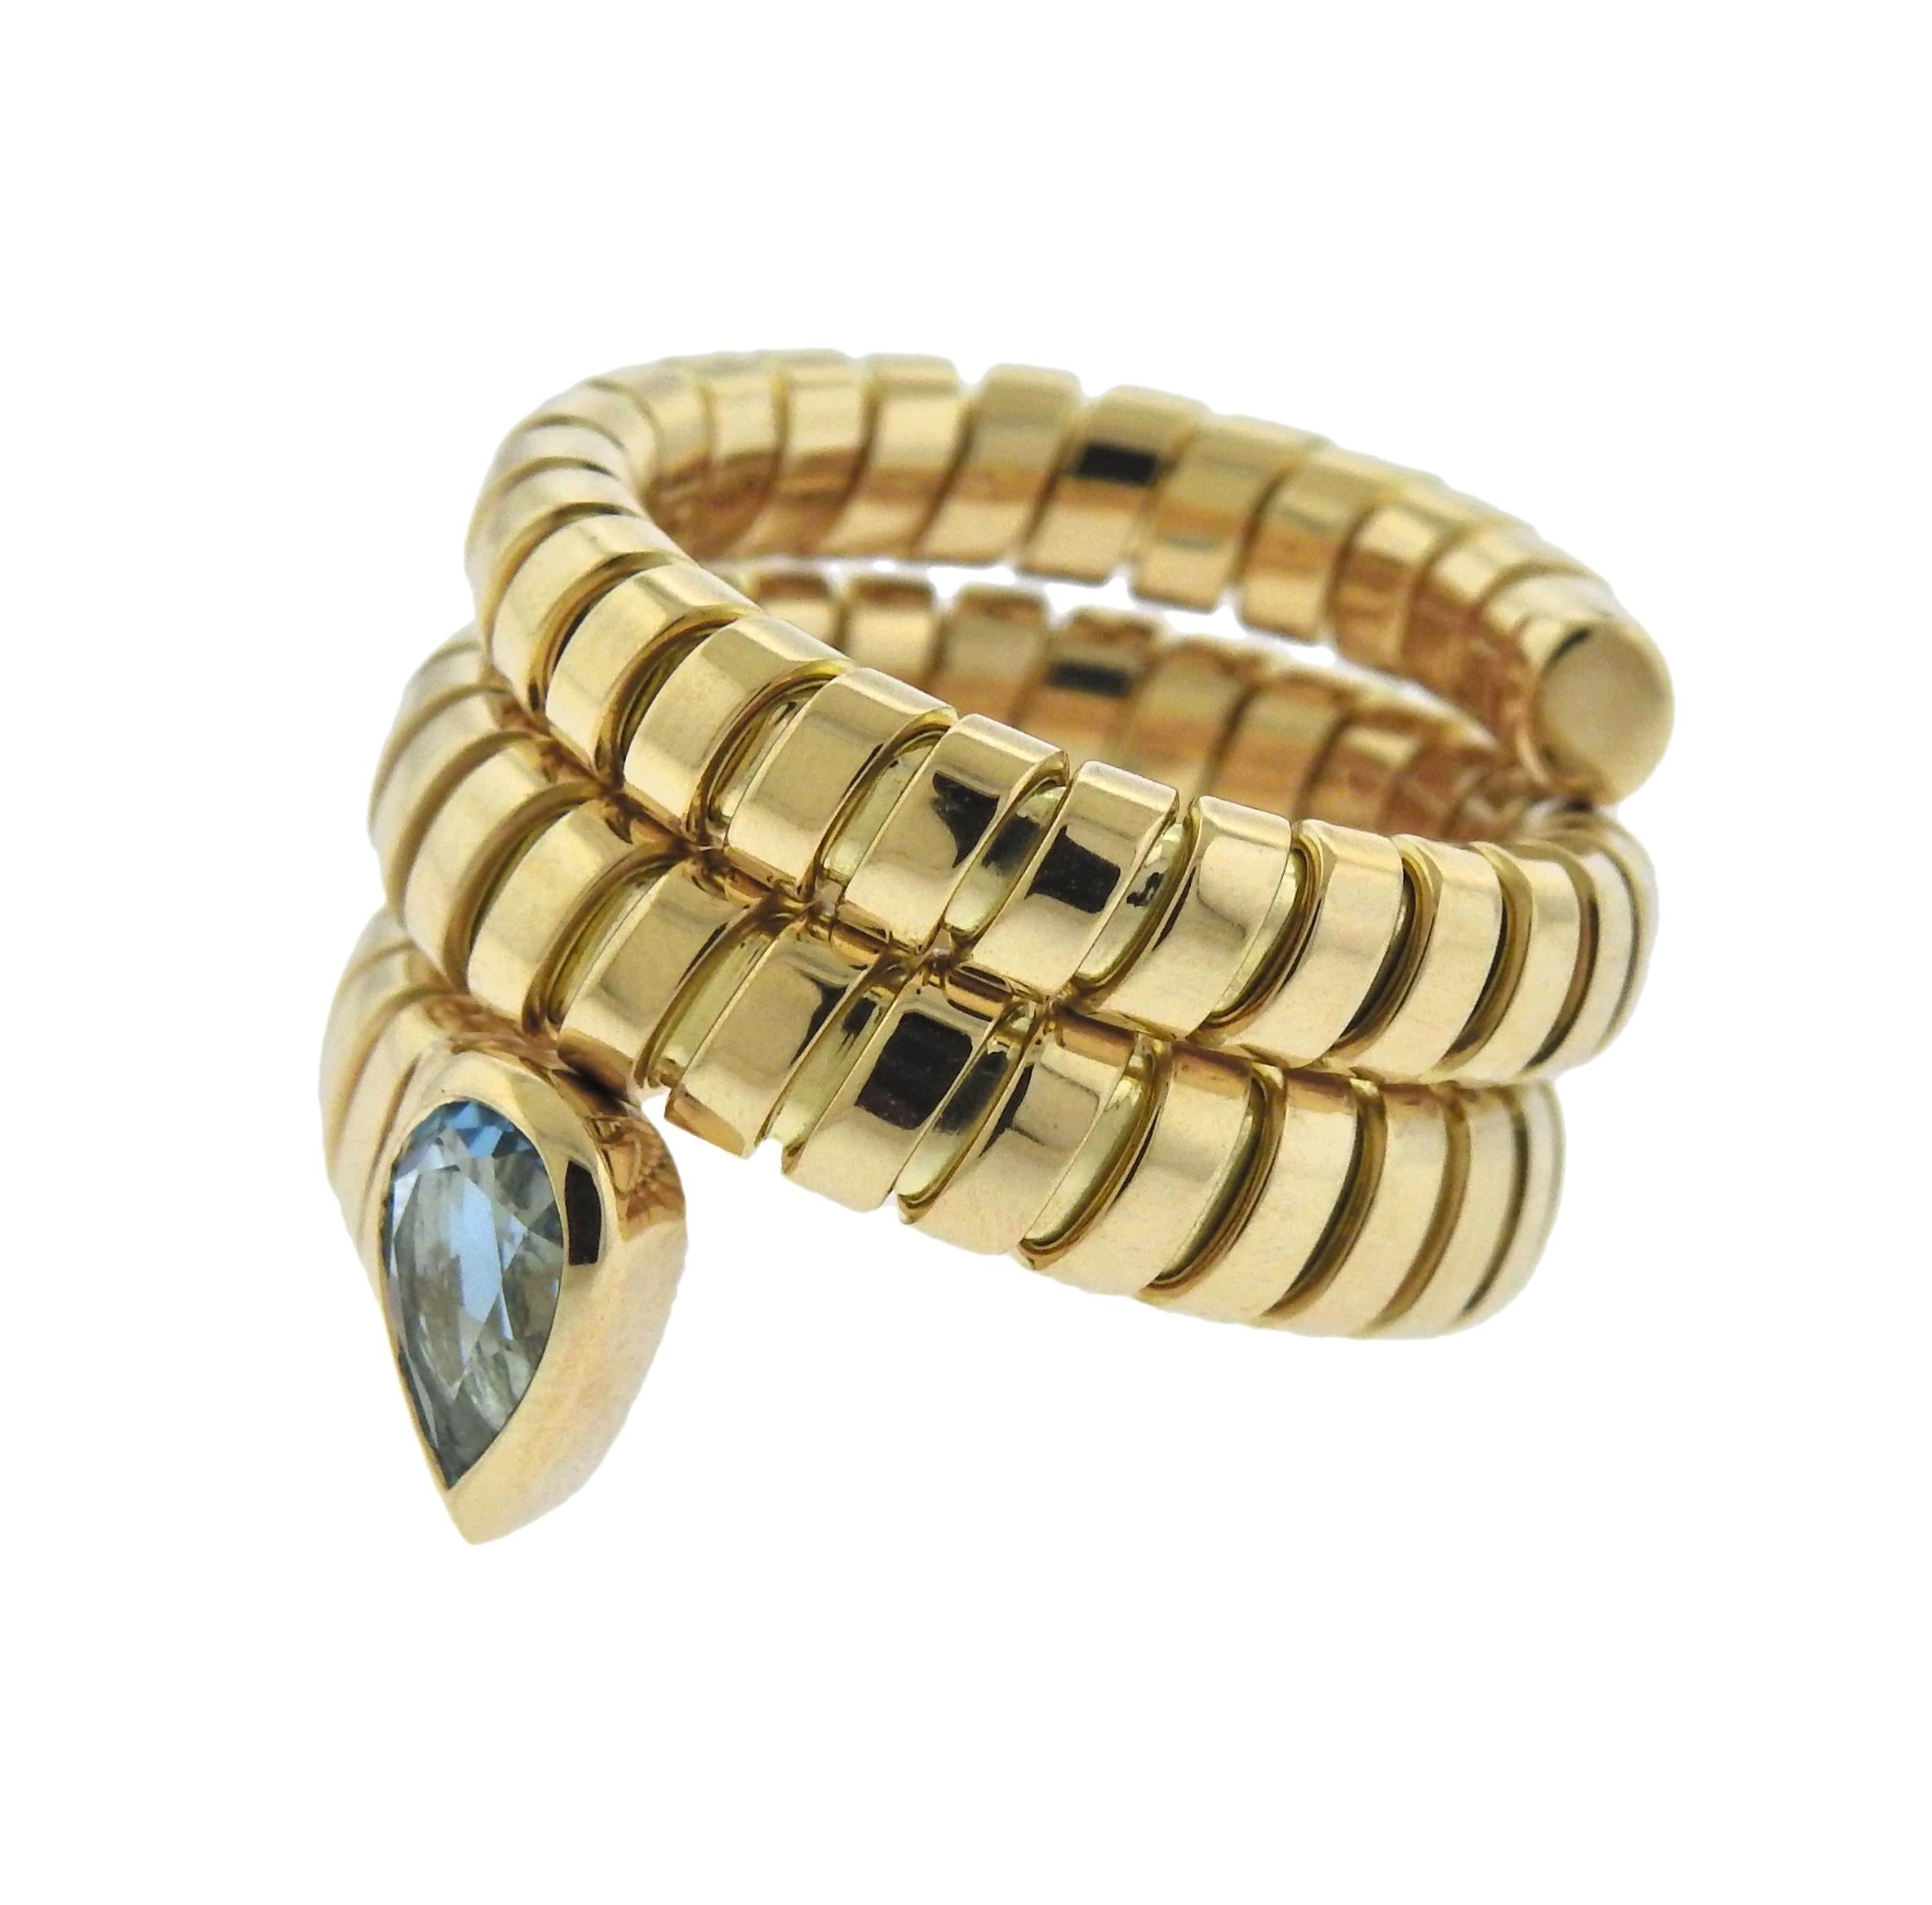 18k gold Tubogas wrap ring by Bulgari, set with blue topaz. Ring size - 6 (slightly flexible construction), ring is 17mm wide, weighs 16.2 grams. Bvlgari, 750, Italian mark.